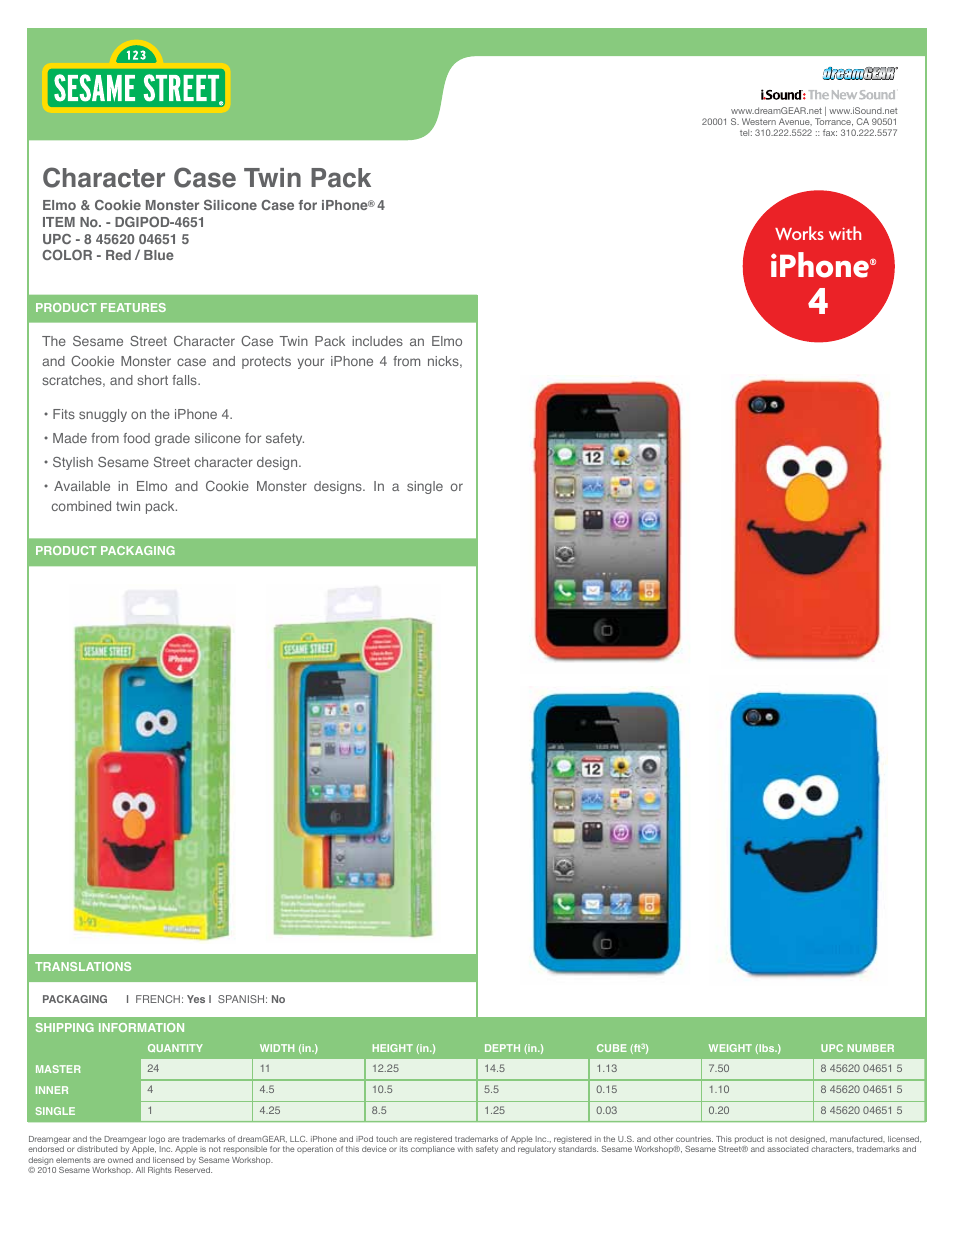 Character Case TWIN PACK for iPhone 4 - Manual